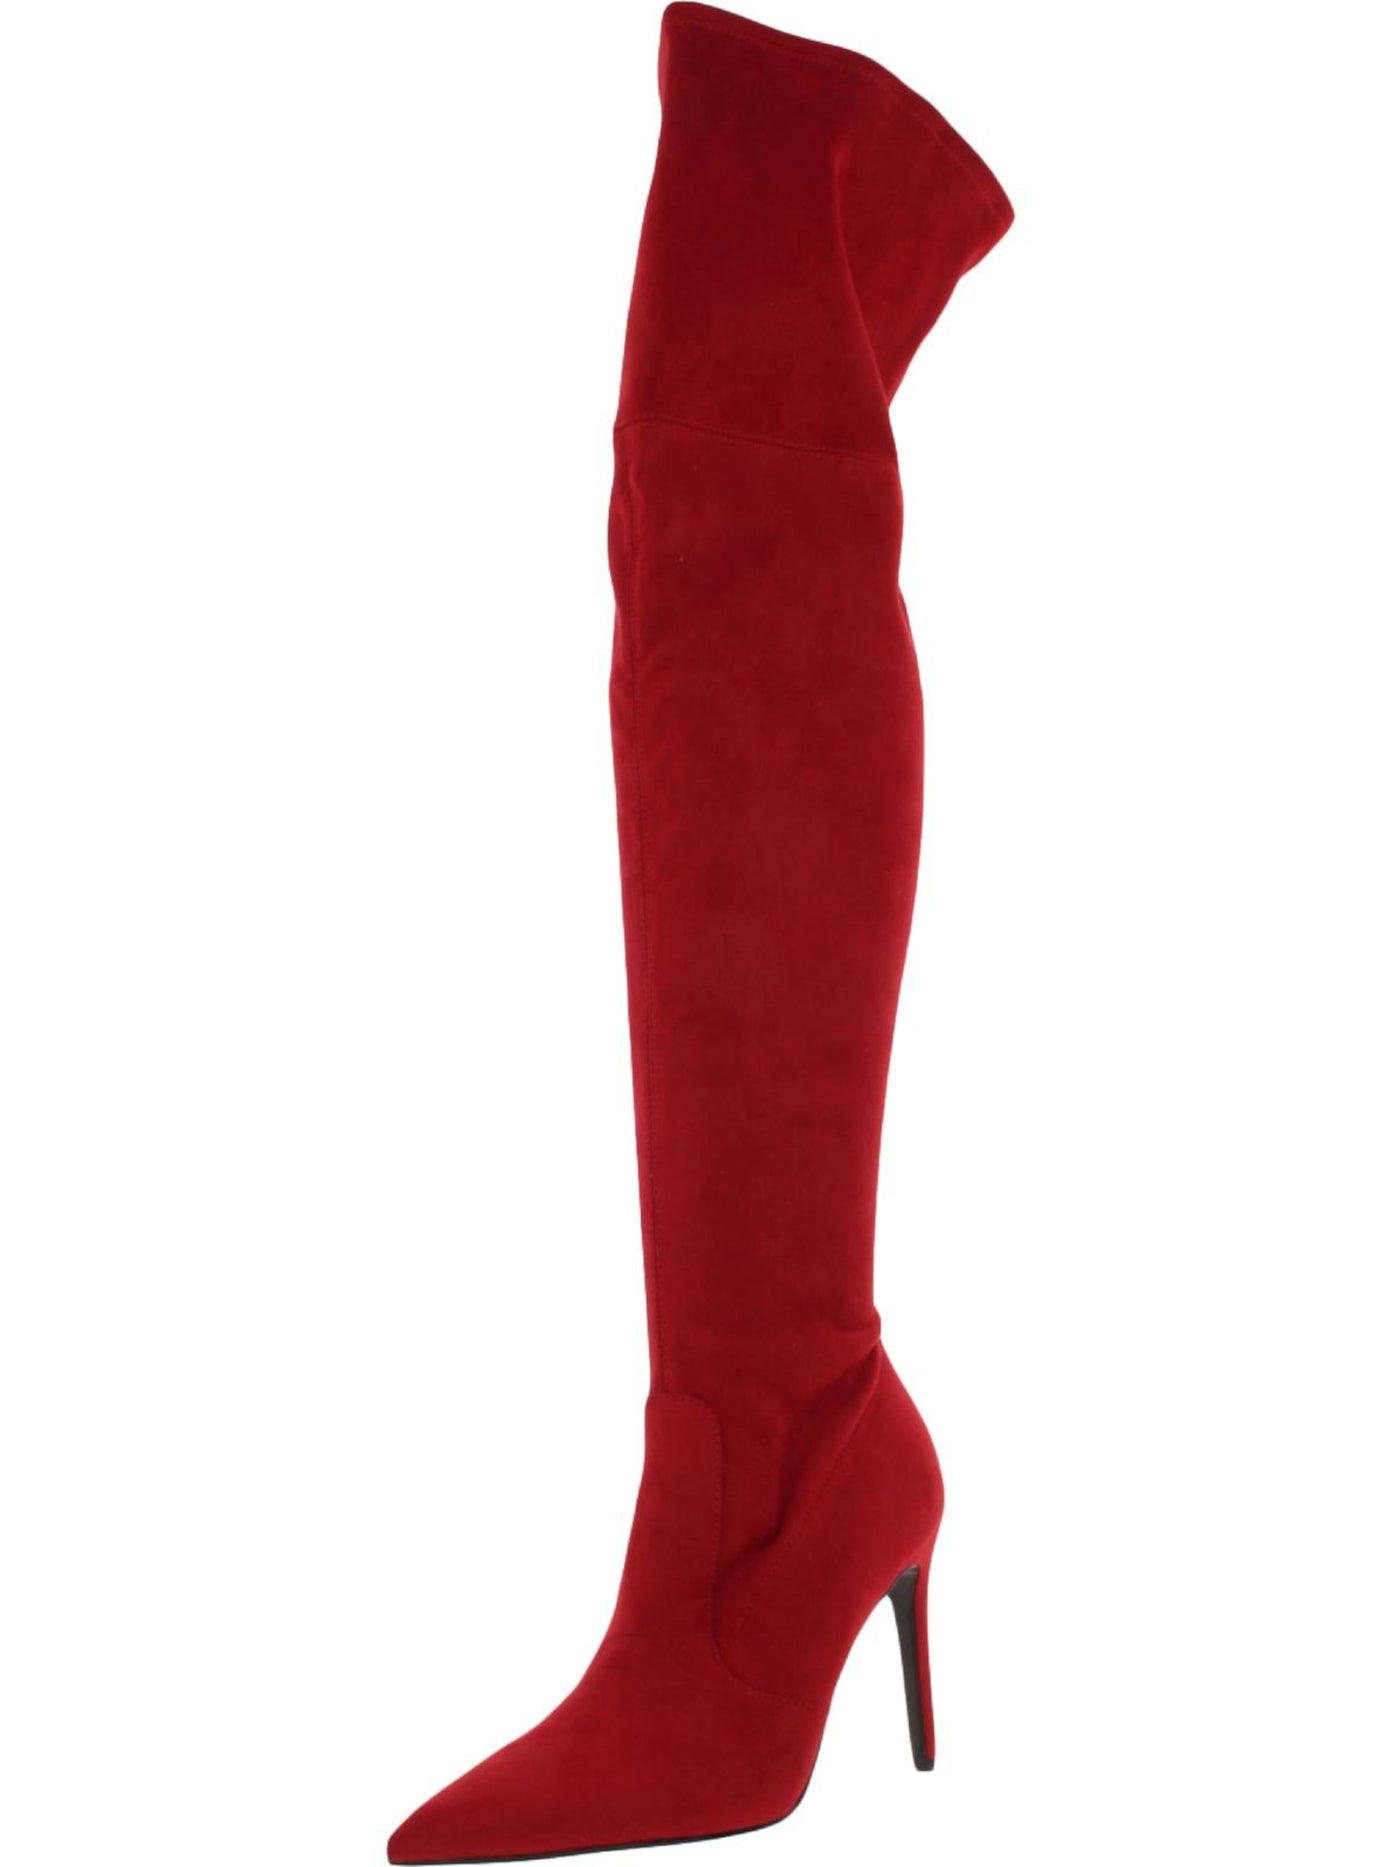 GUESS Womens Red Comfort Stretch Bonis Pointy Toe Stiletto Zip-Up Dress Boots 5 M